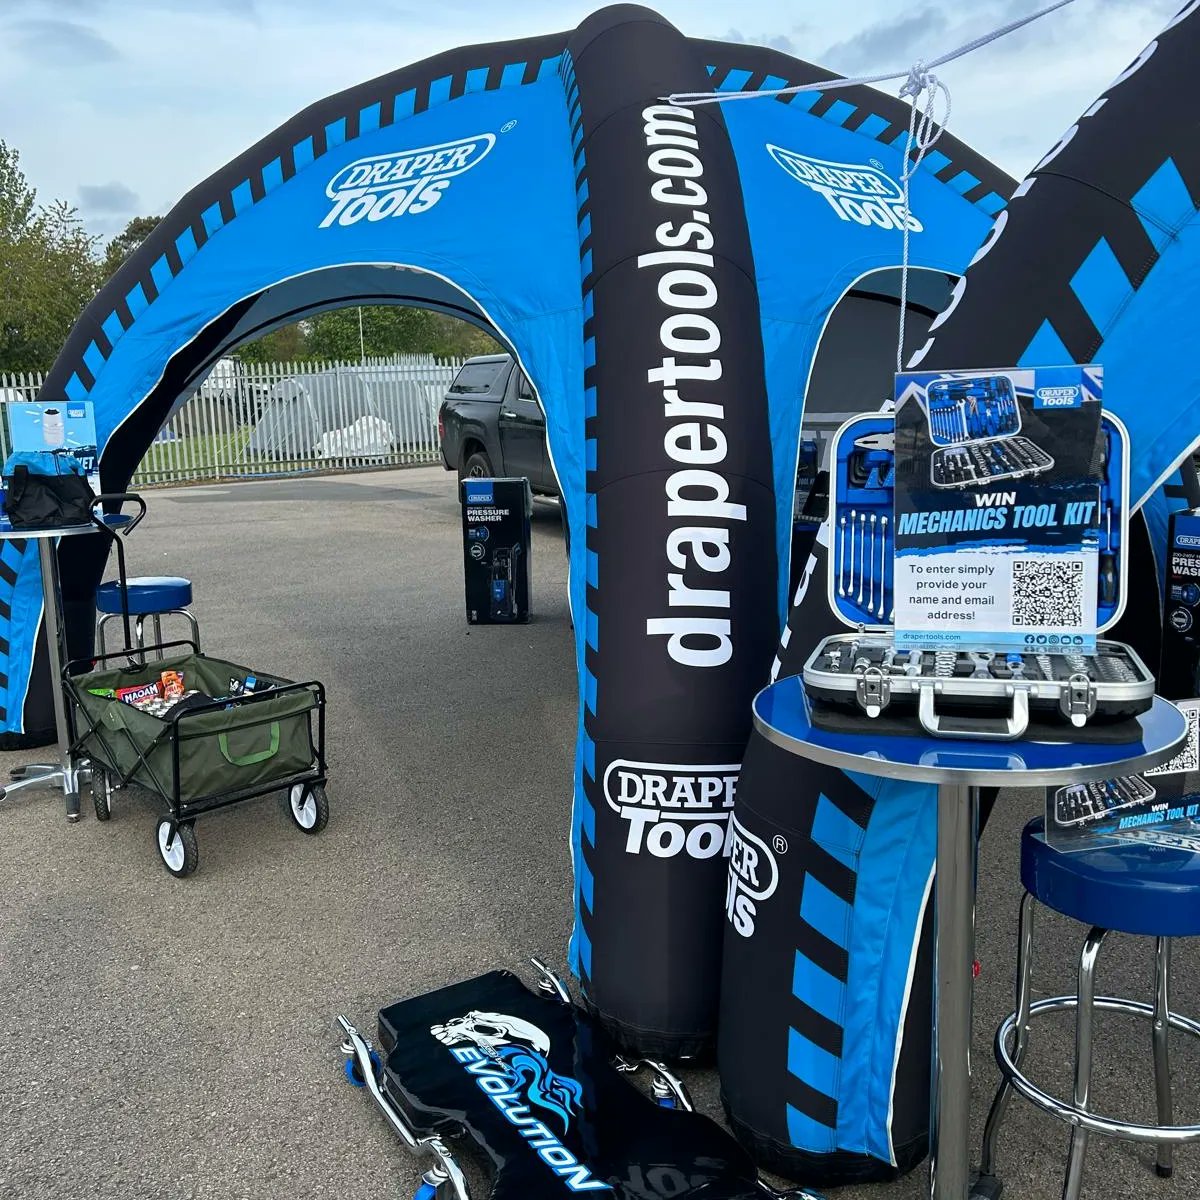 We're here! 🏁

Find us in the paddock next to @Excelr8M @BristolStMotors

The find the 10mm socket game is back, along with our free giveaway!

#drapertools #EXCELR8Motorsport #meetatthestreet #bristolstreetmotors